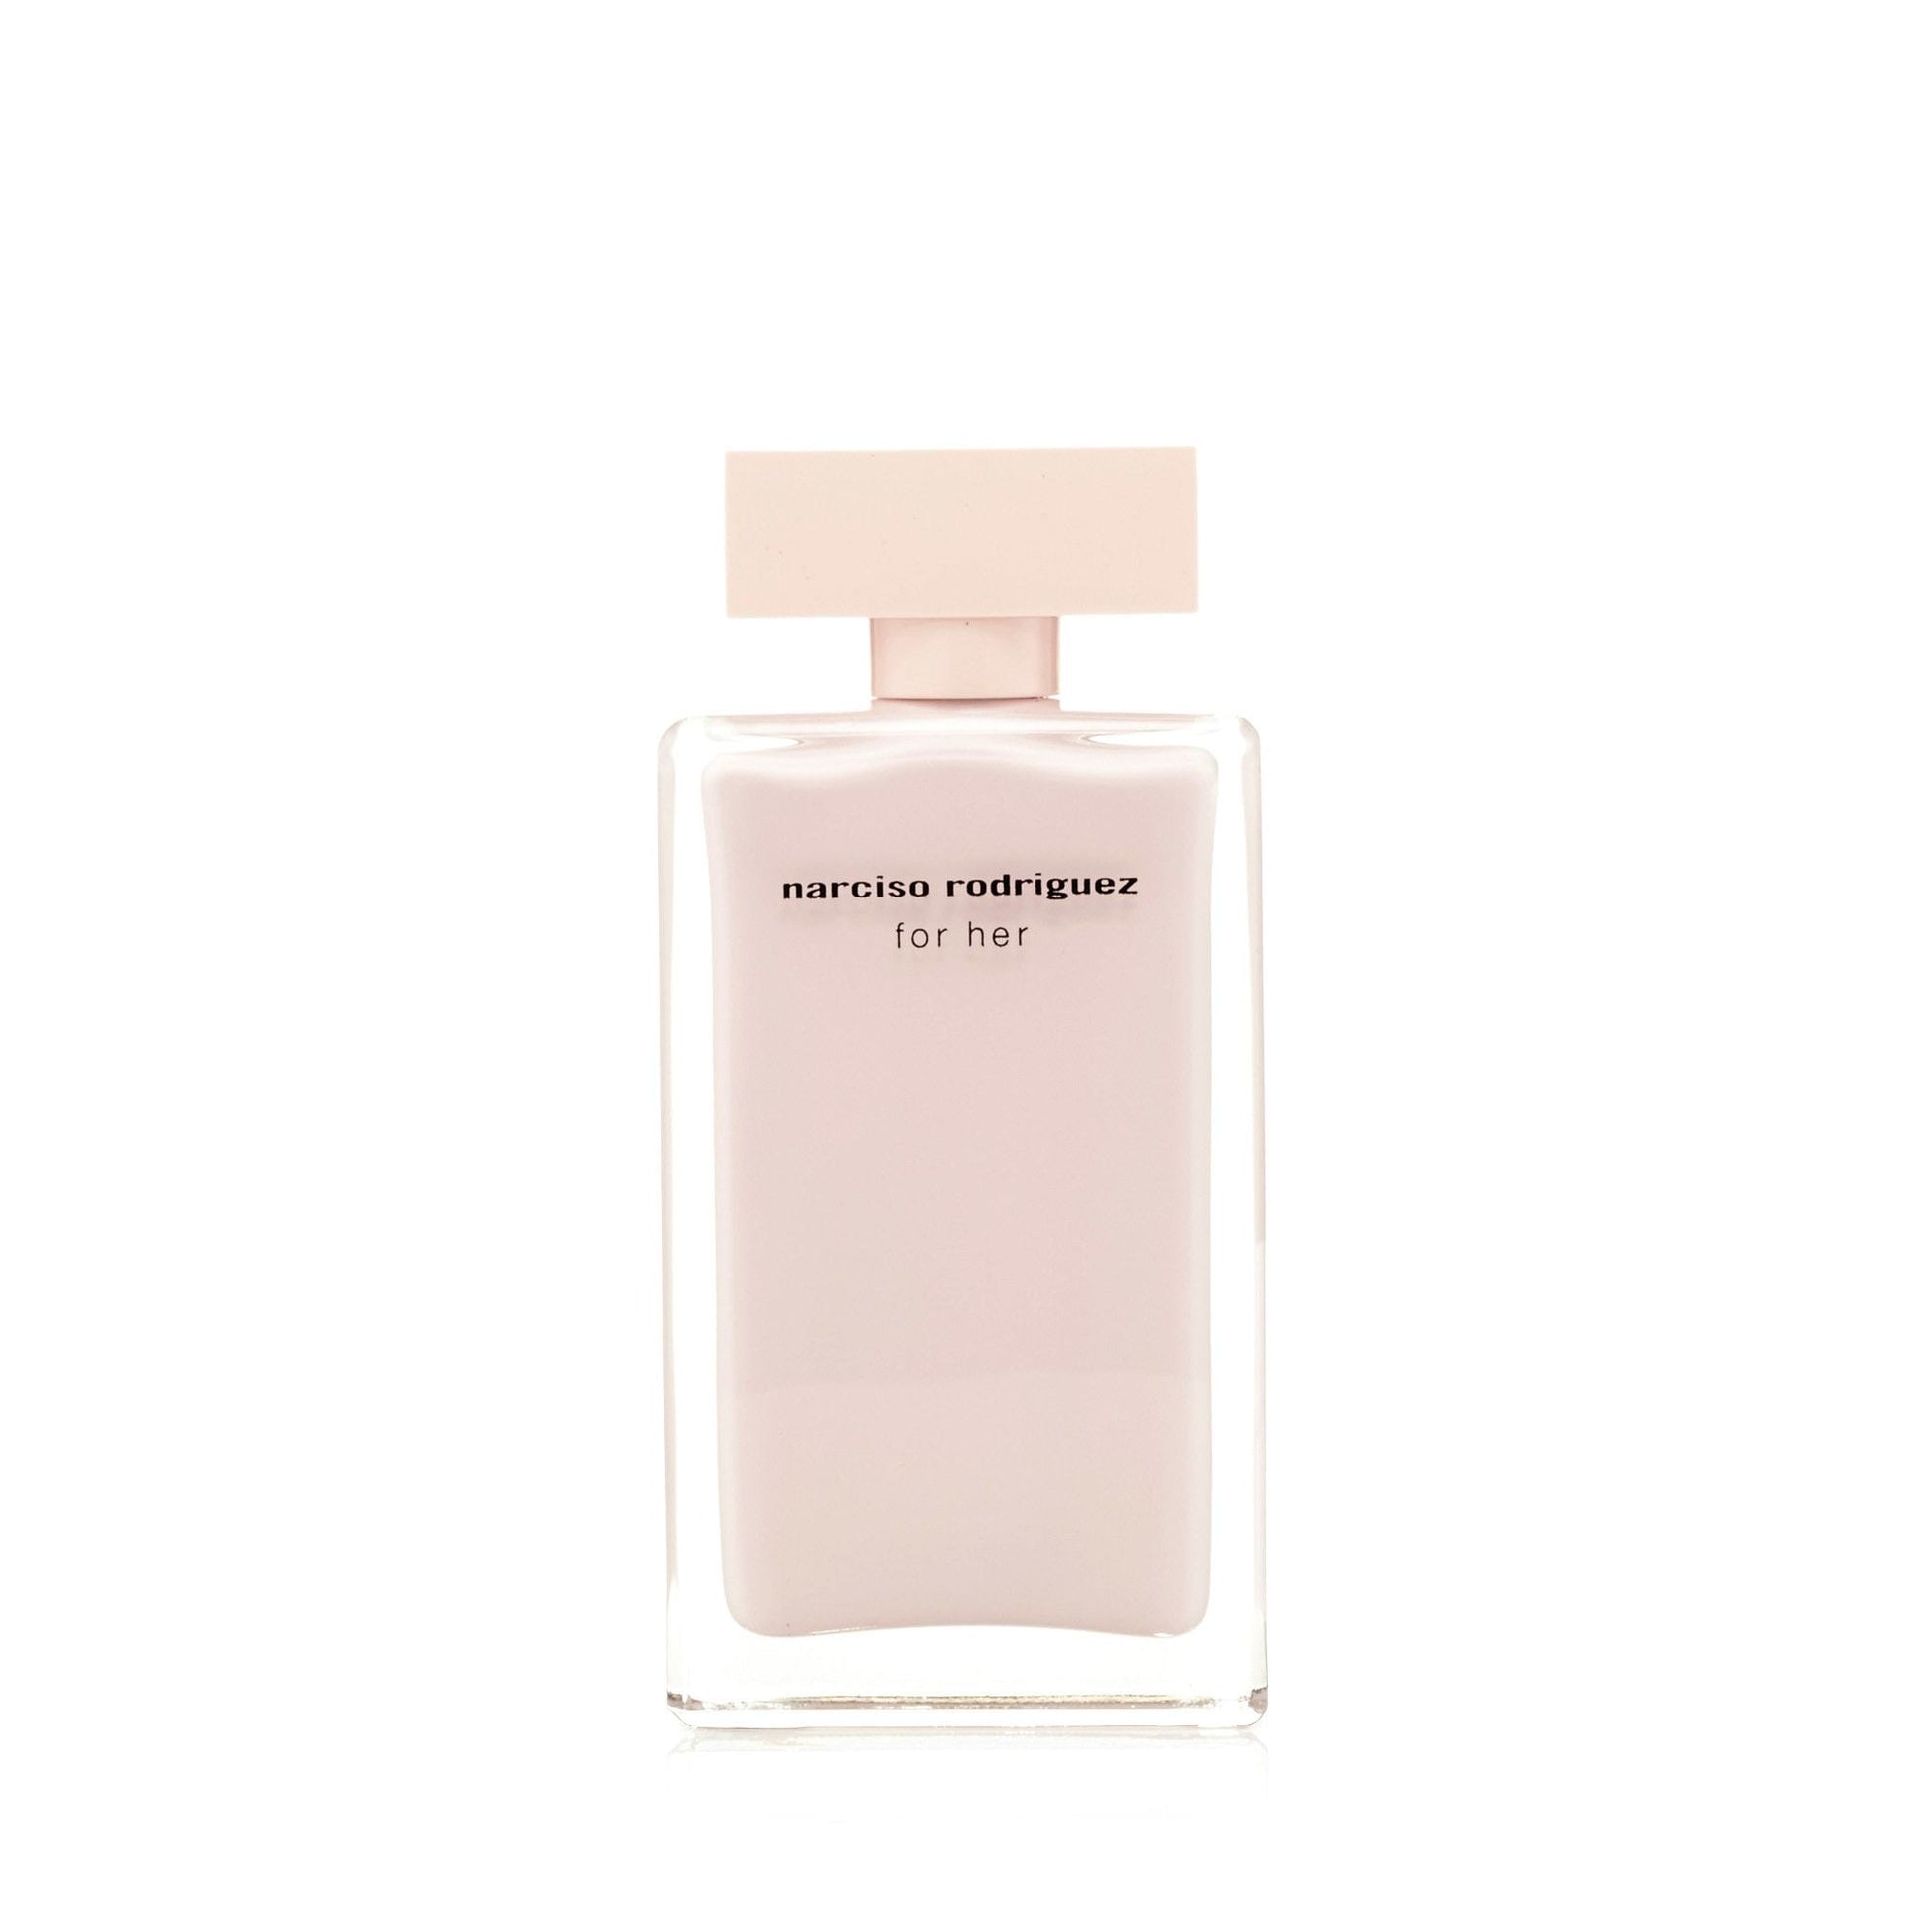 Narciso Rodriguez Eau de Parfum Spray for Women by Narciso Rodriguez, Product image 2